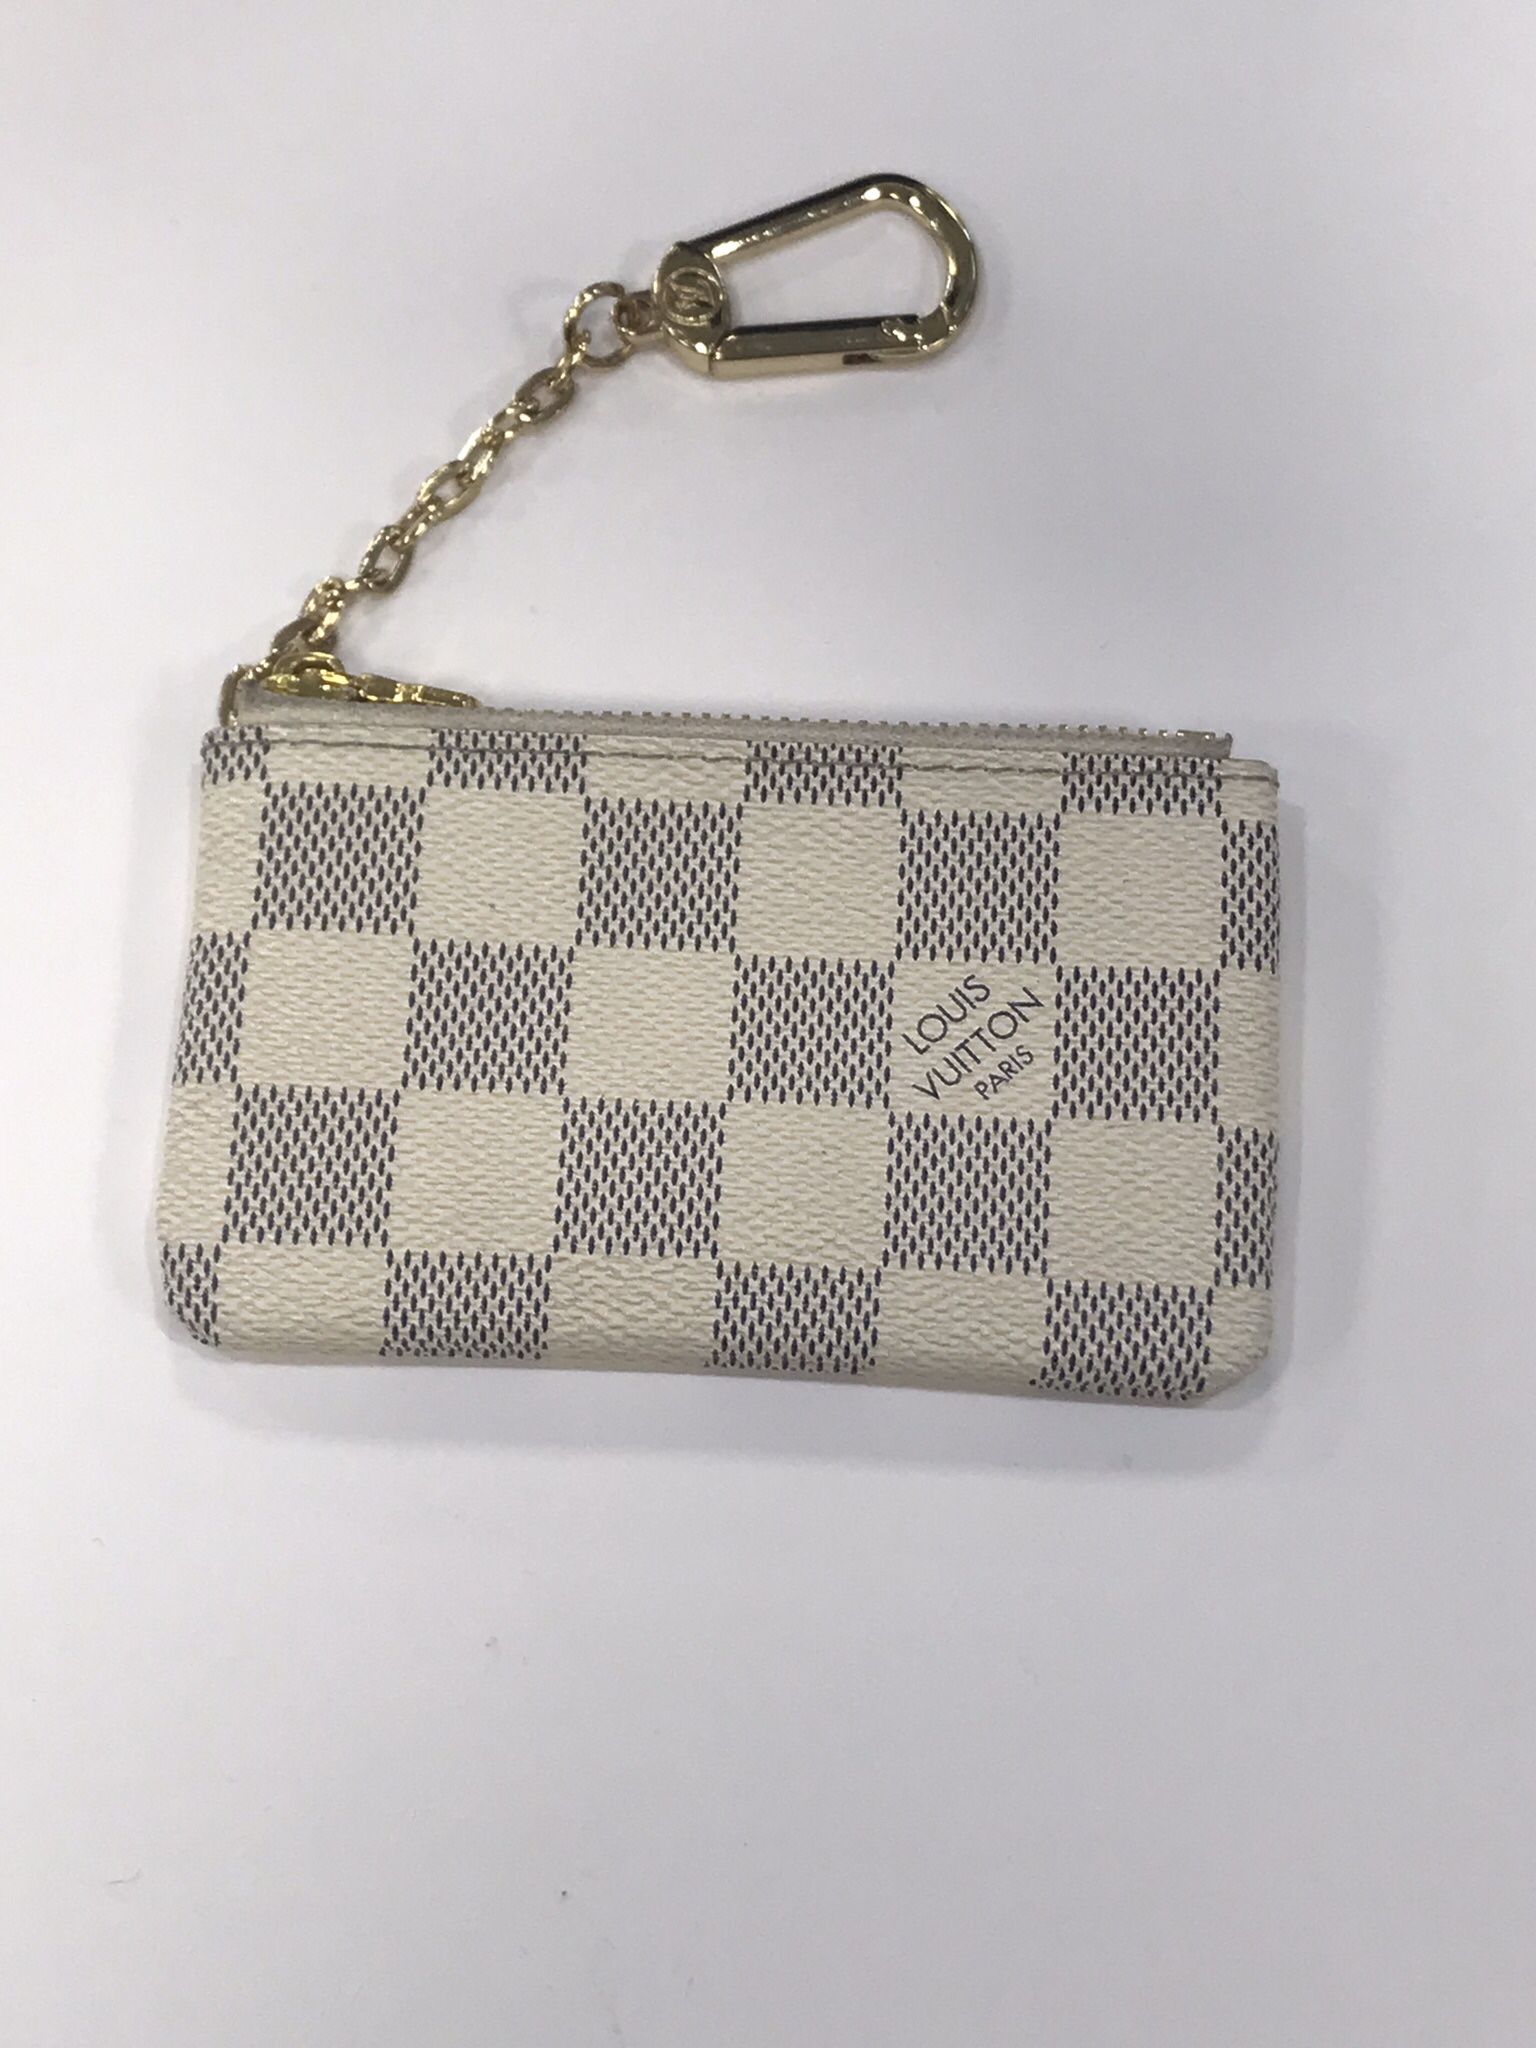 Louis Vuitton Used Key Pouch